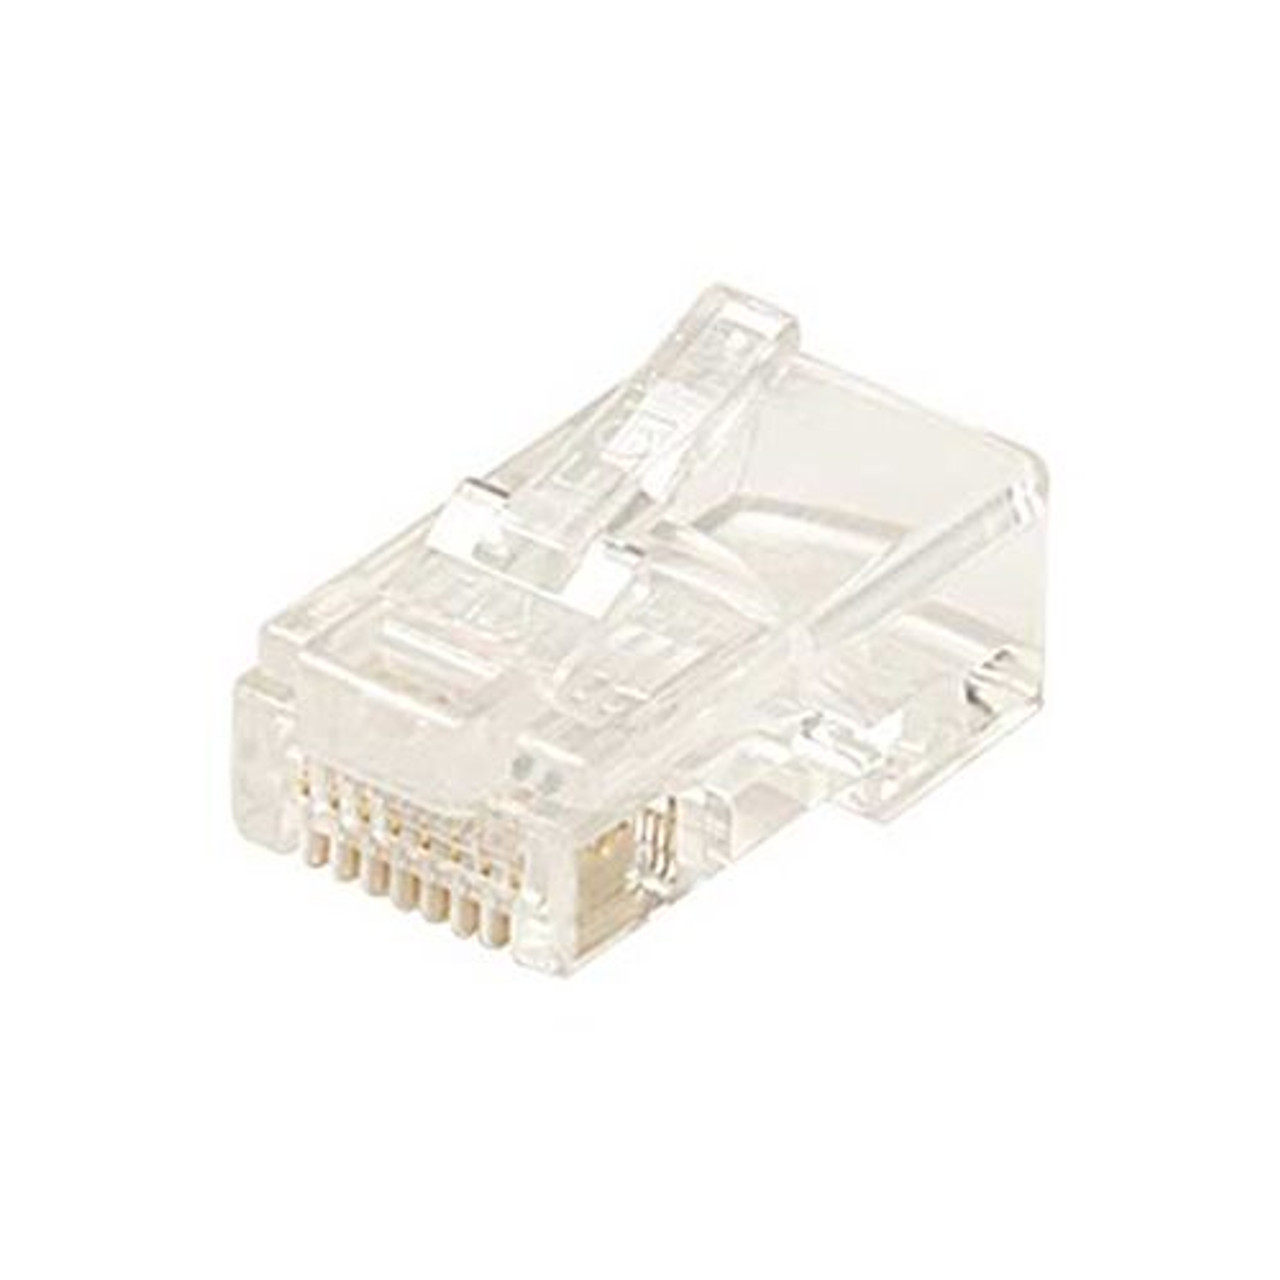 Steren 301-068-50 RJ45 8P8C Modular Plug Connector 50 Pack Flat Cable UL 8 x 8 Conductor Stranded Flat Gold Plated Contacts 8 Data Telephone Line RJ-45 Plugs